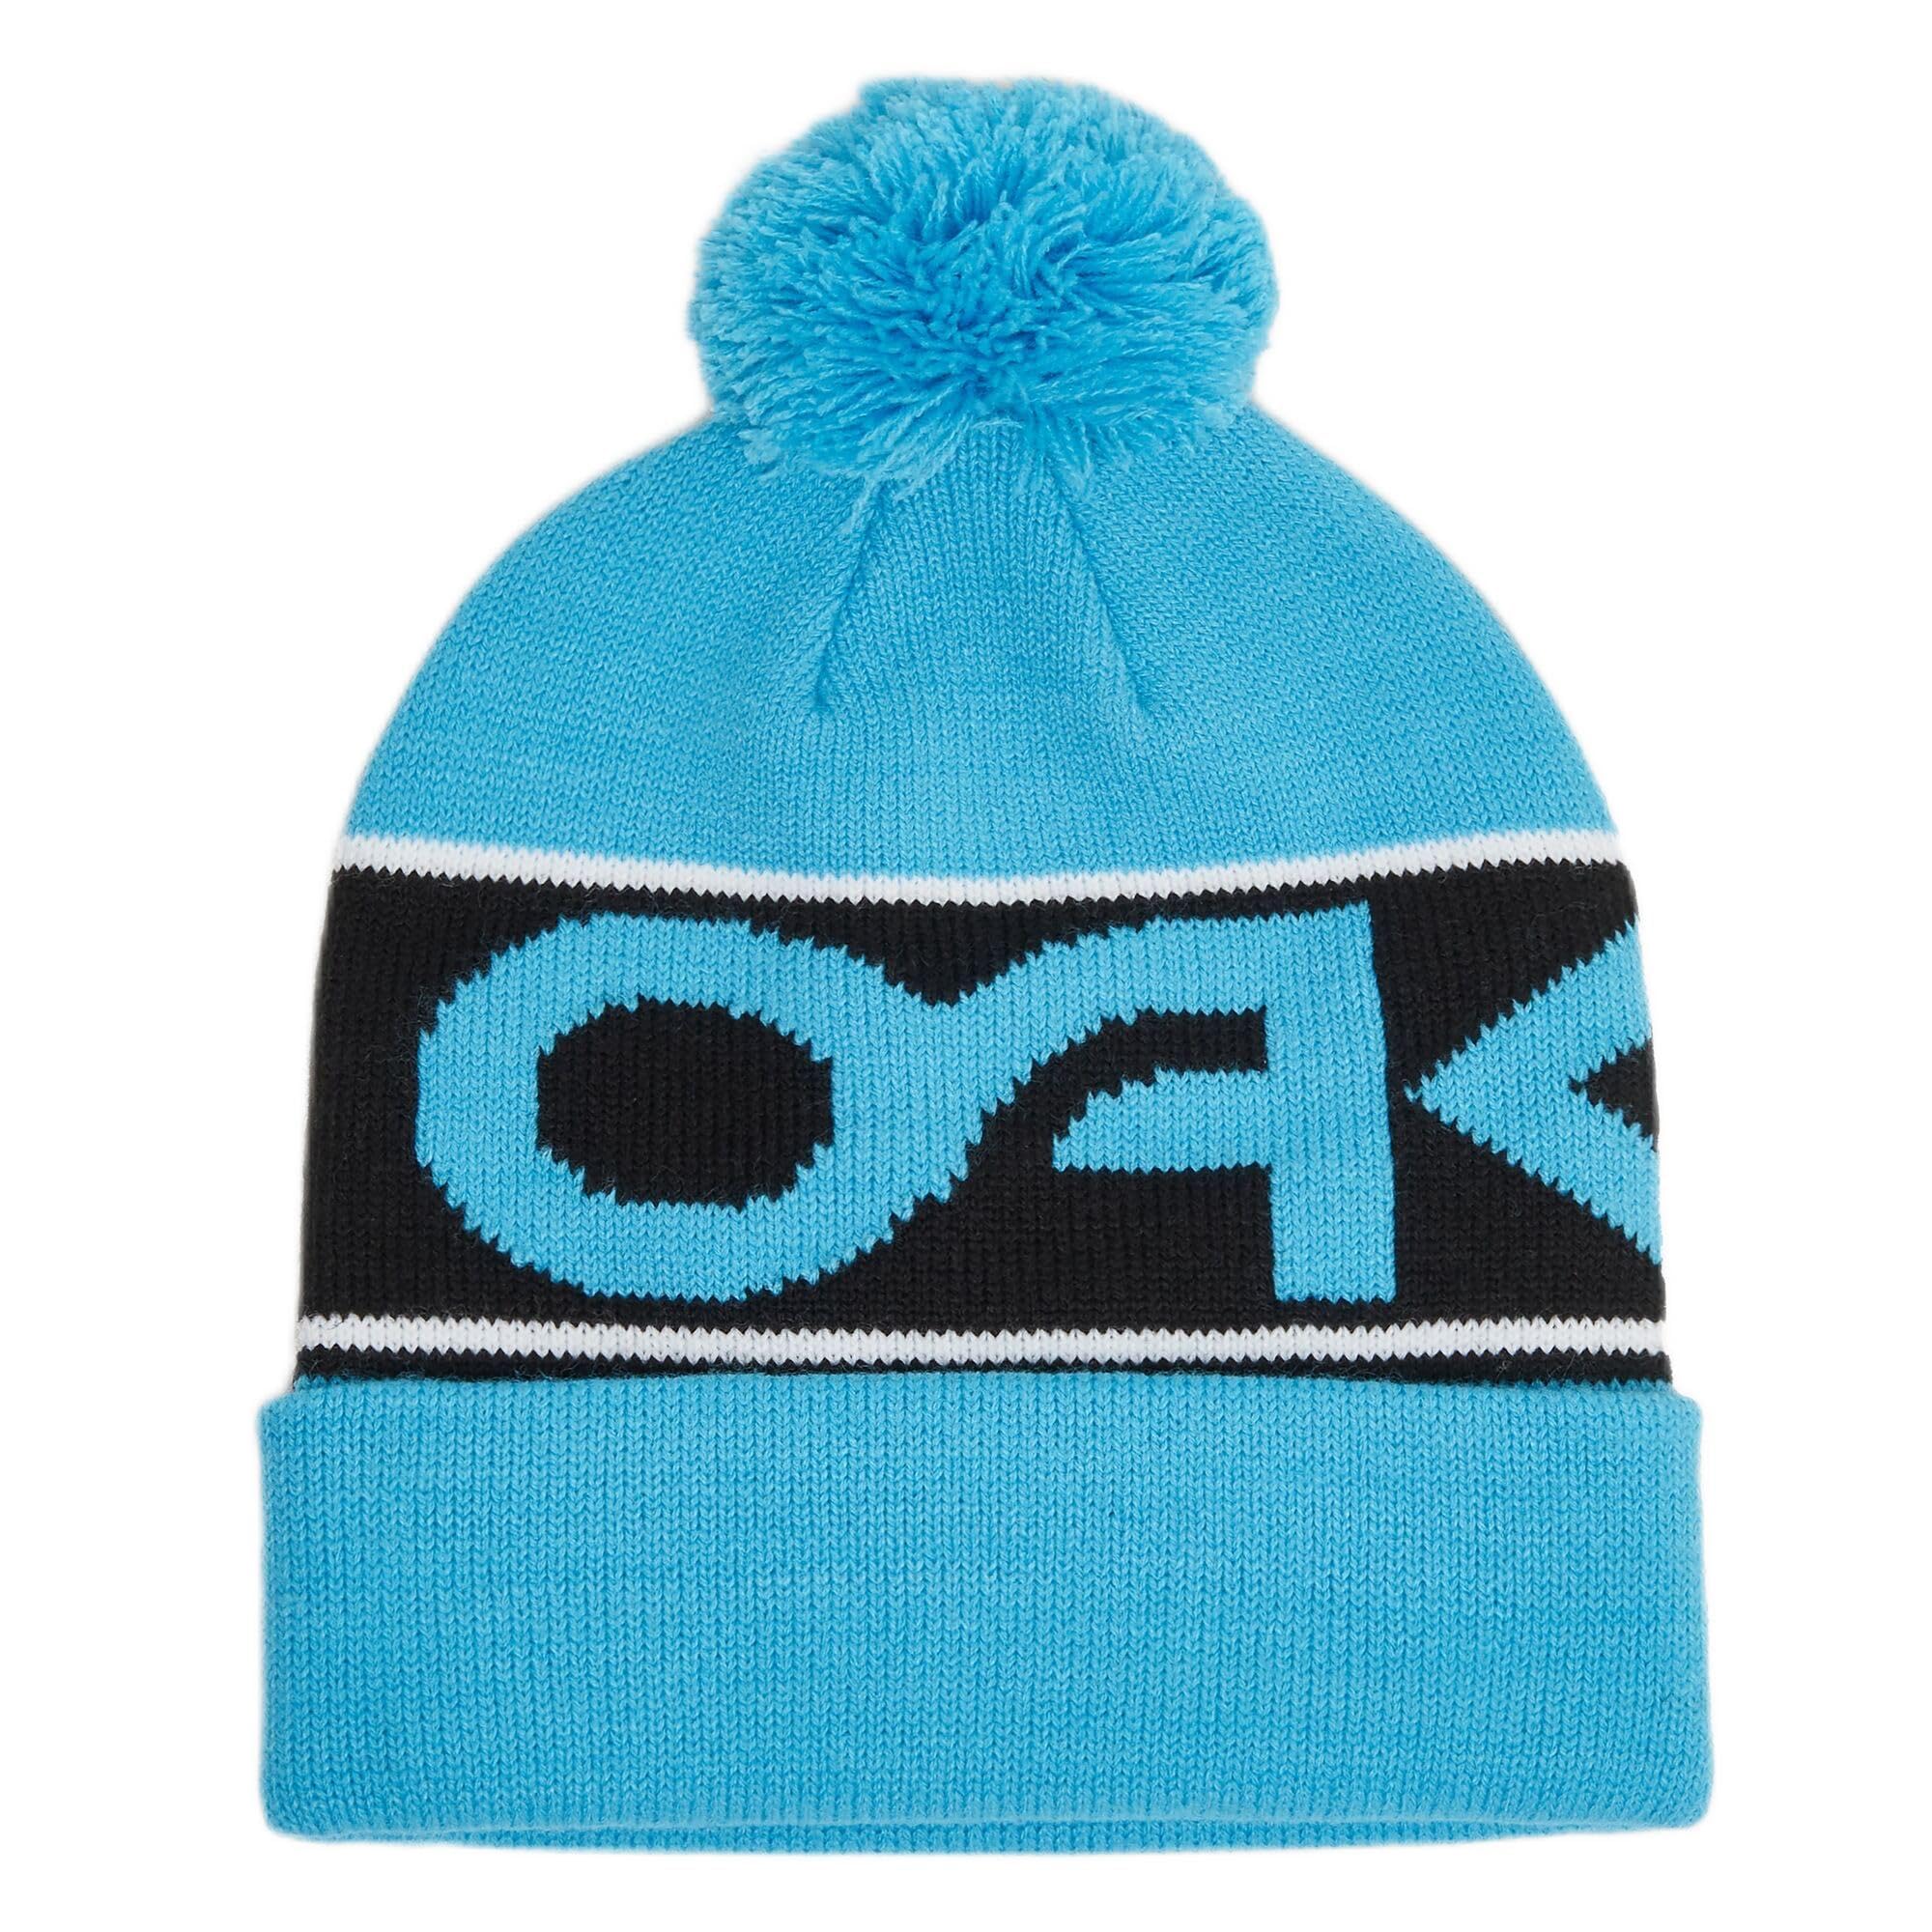 Oakley Men's Factory Cuff Beanie, Bright Blue, One Size $9.72 + Free Shipping w/ Prime or on $35+